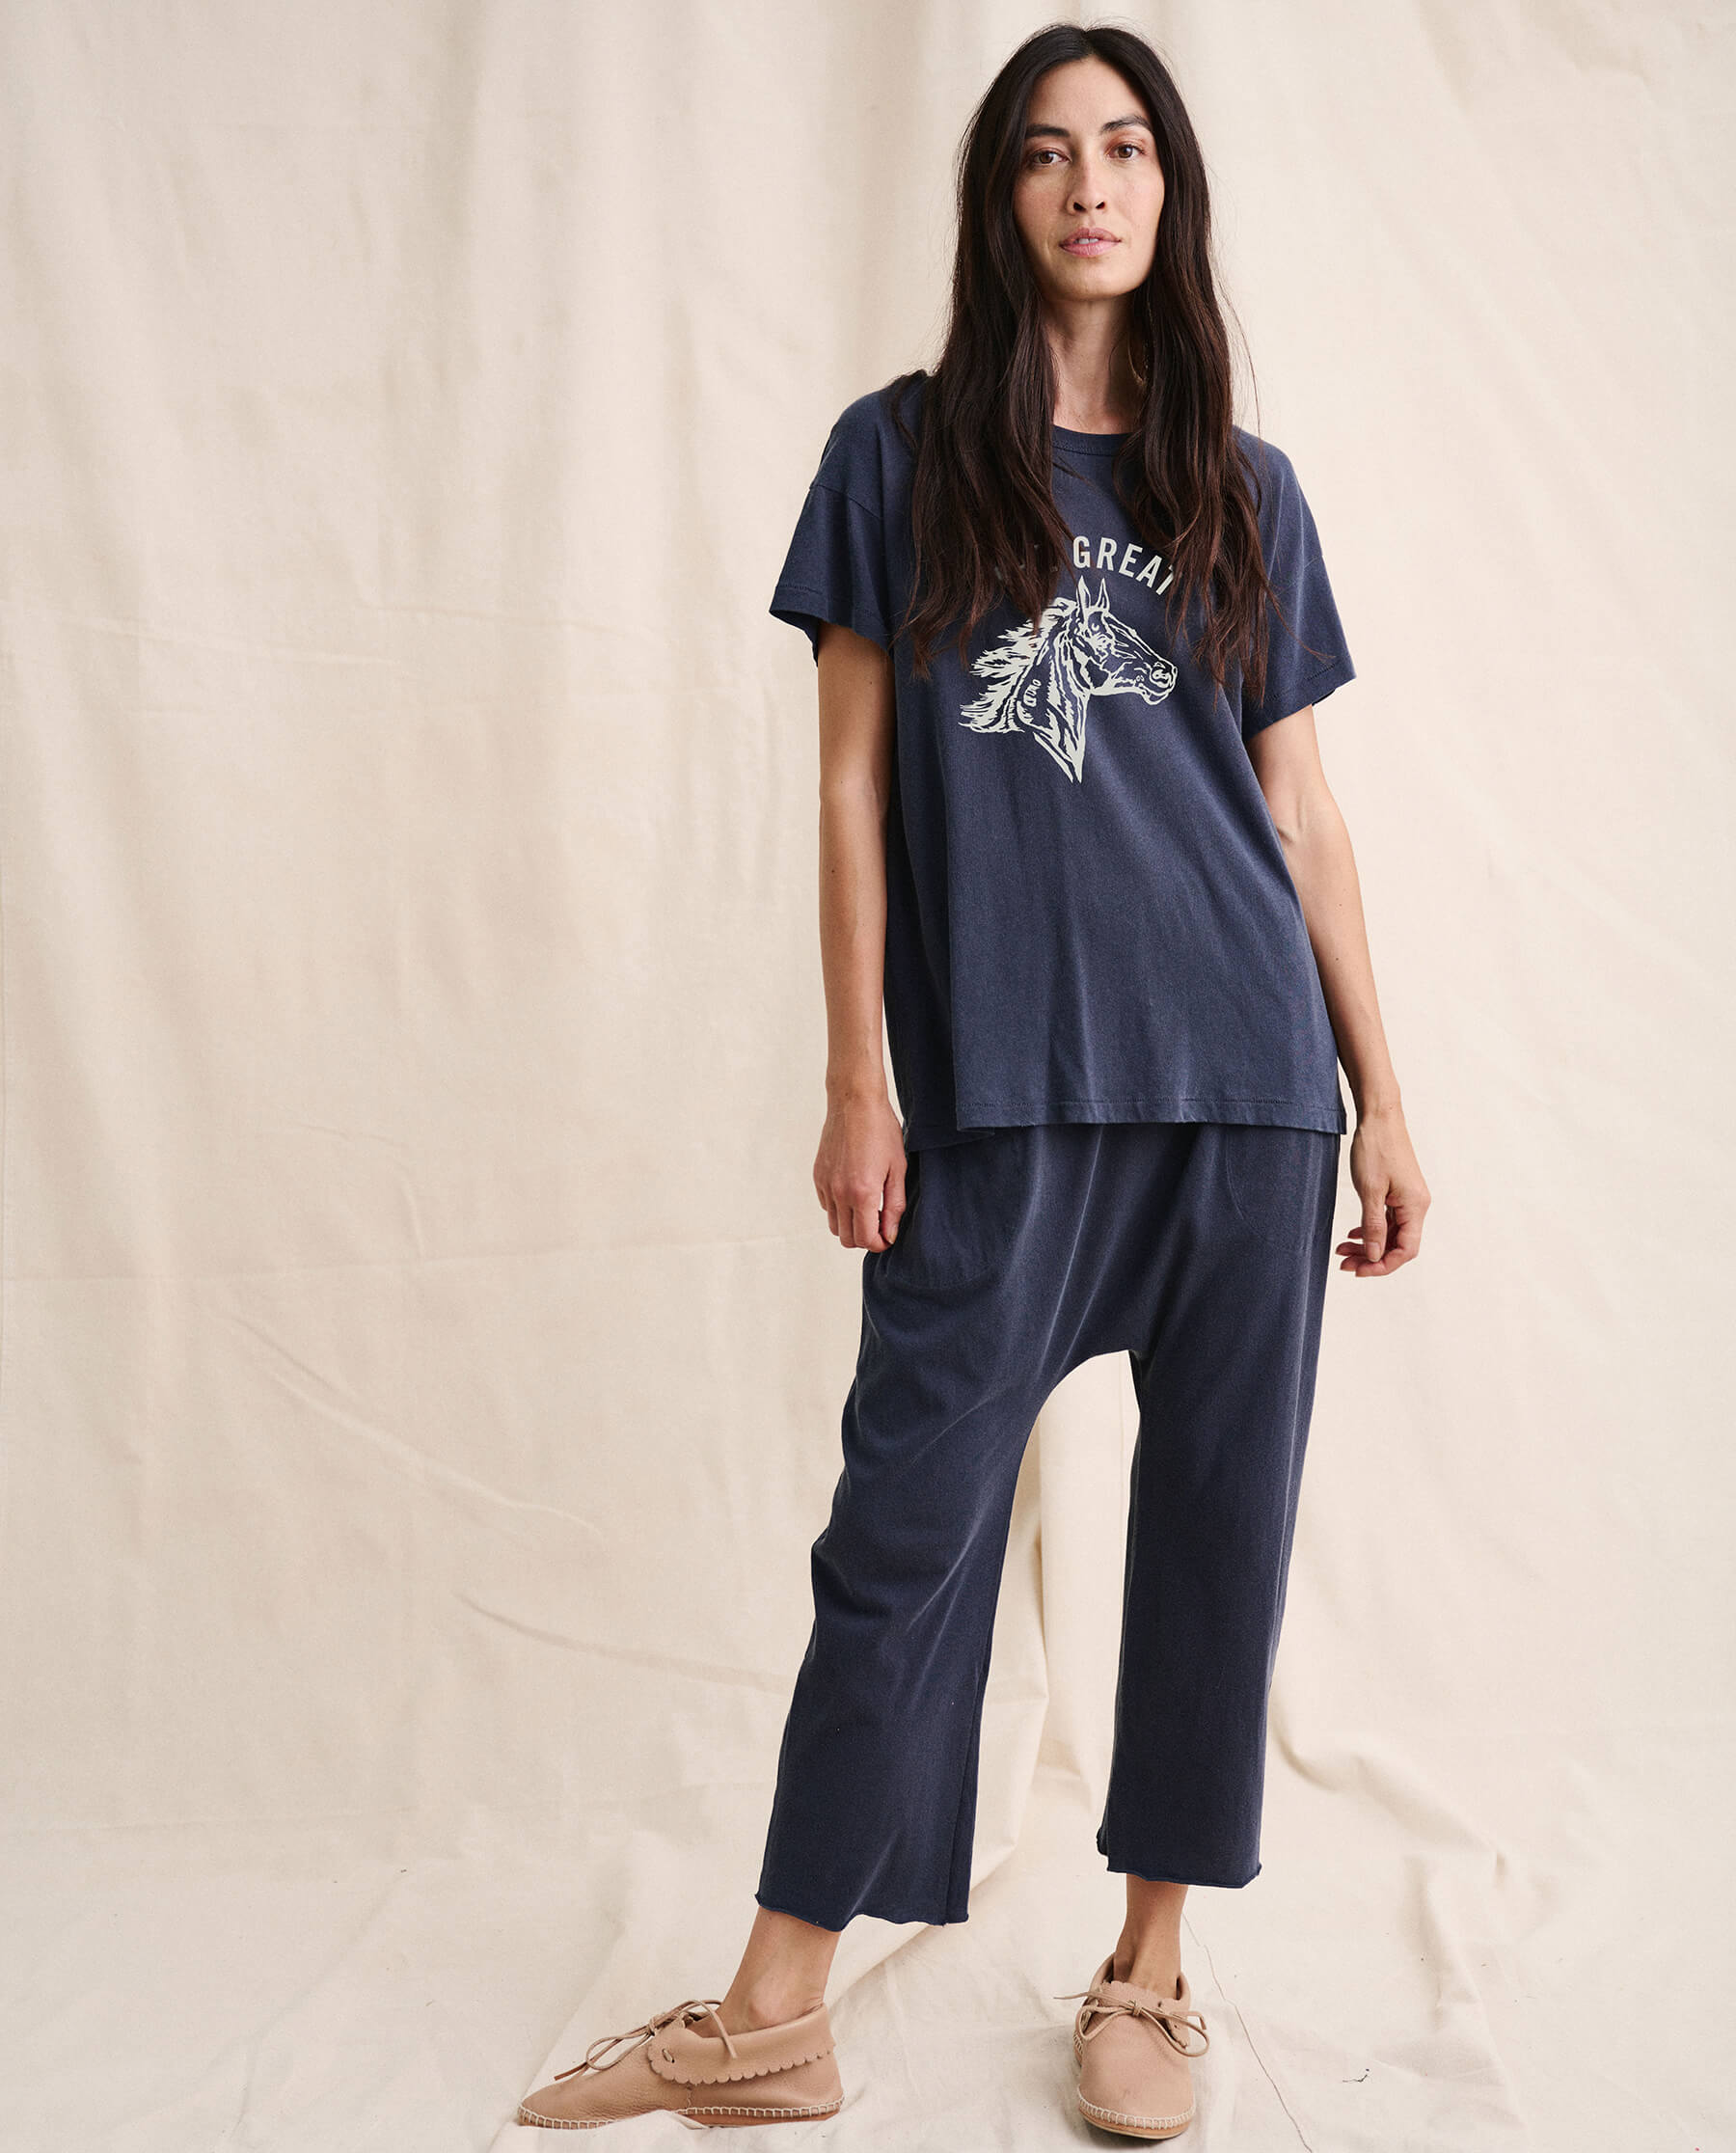 The Boxy Crew. Graphic -- Washed Navy with Cream Bronco Graphic